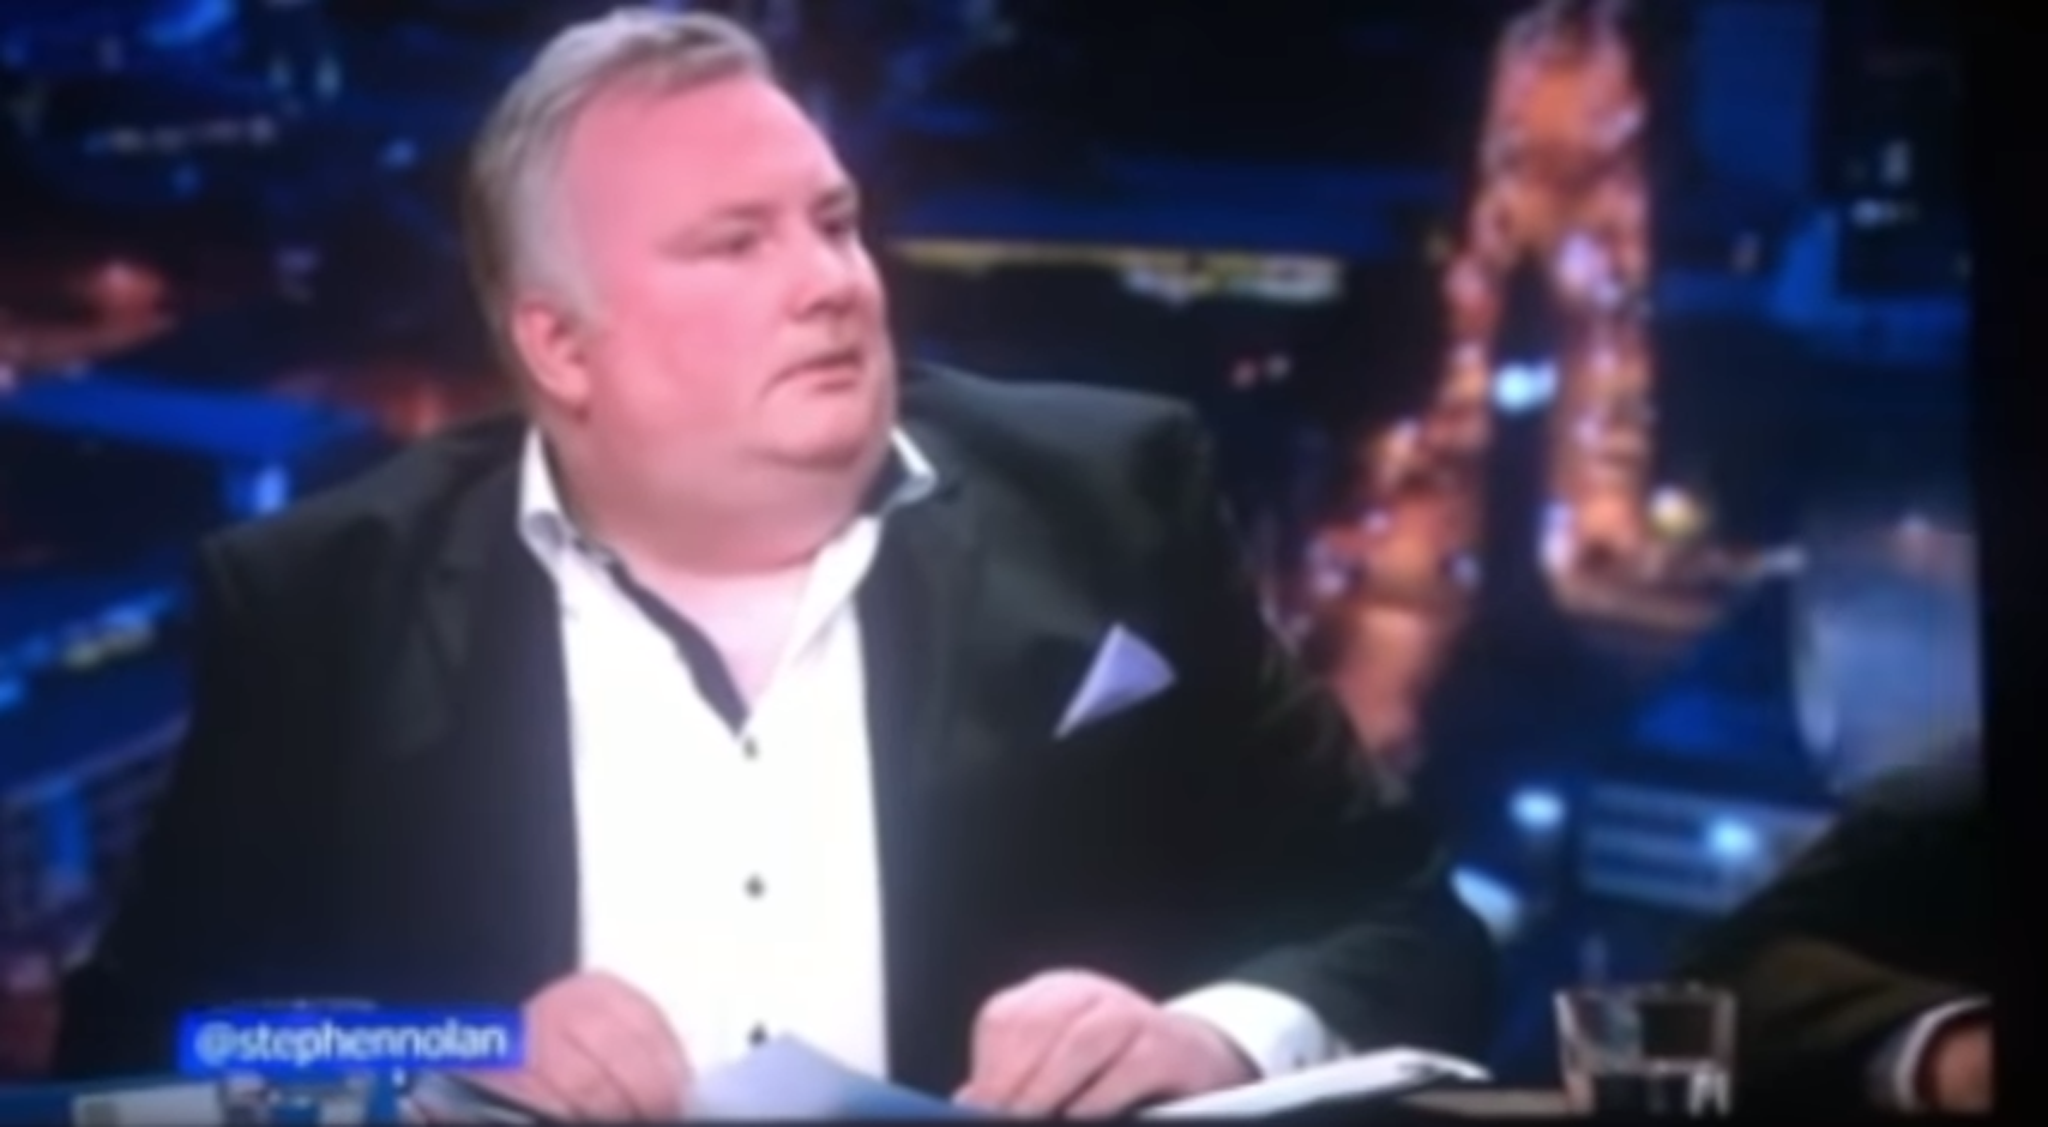 TV presenter Stephen Nolan claims a stage invader at the 2018 Eurovision song contest was the same person who interrupted him during BBC's Nolan Live